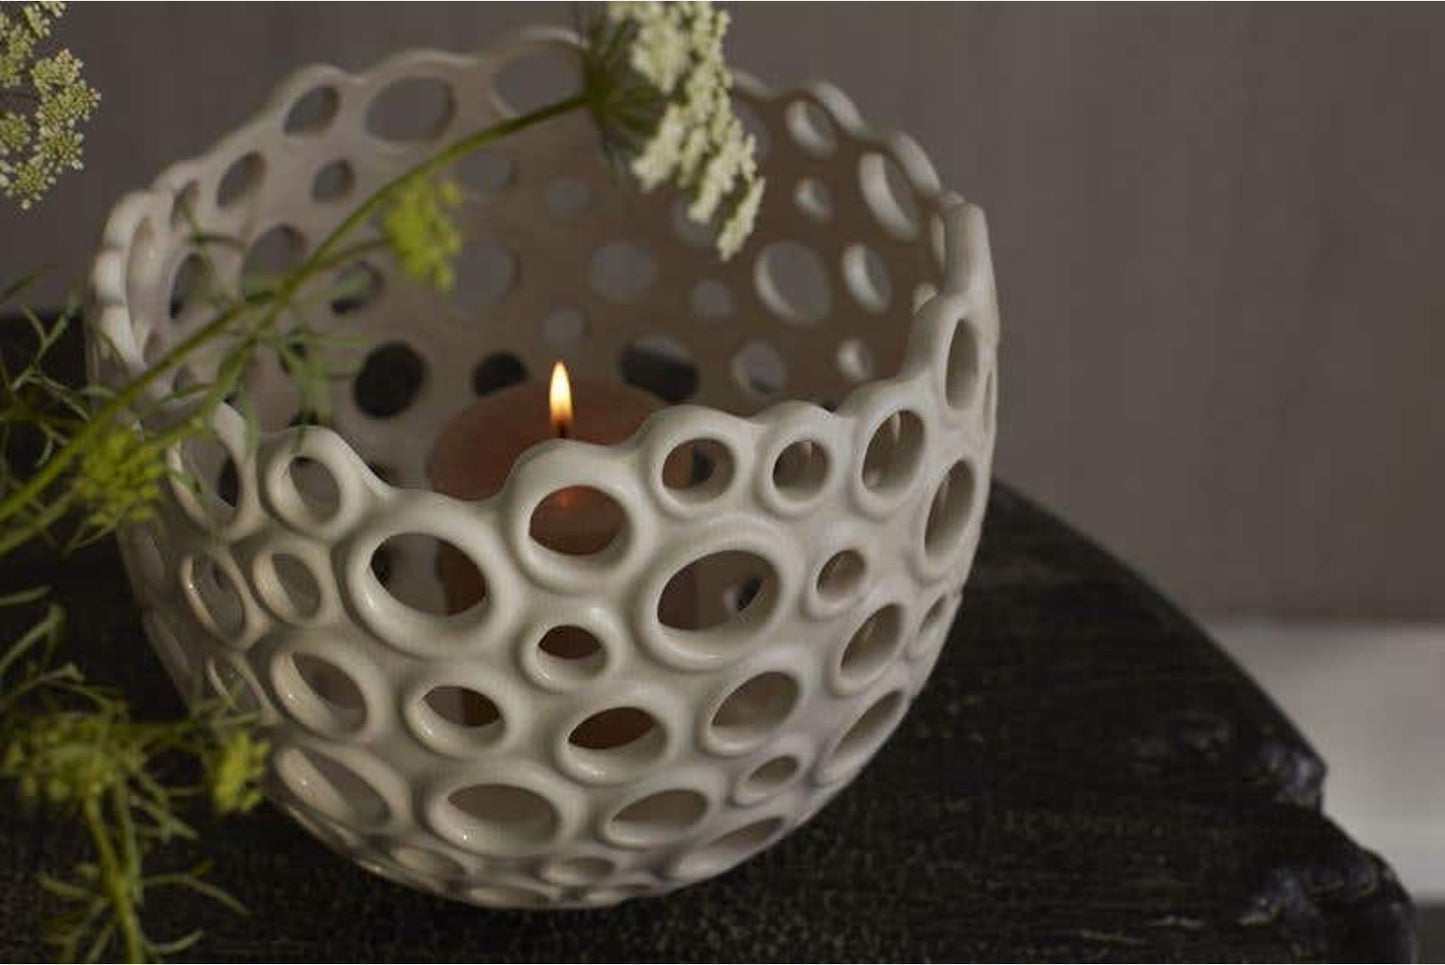 Ceramic pot with holes and a lit candle inside